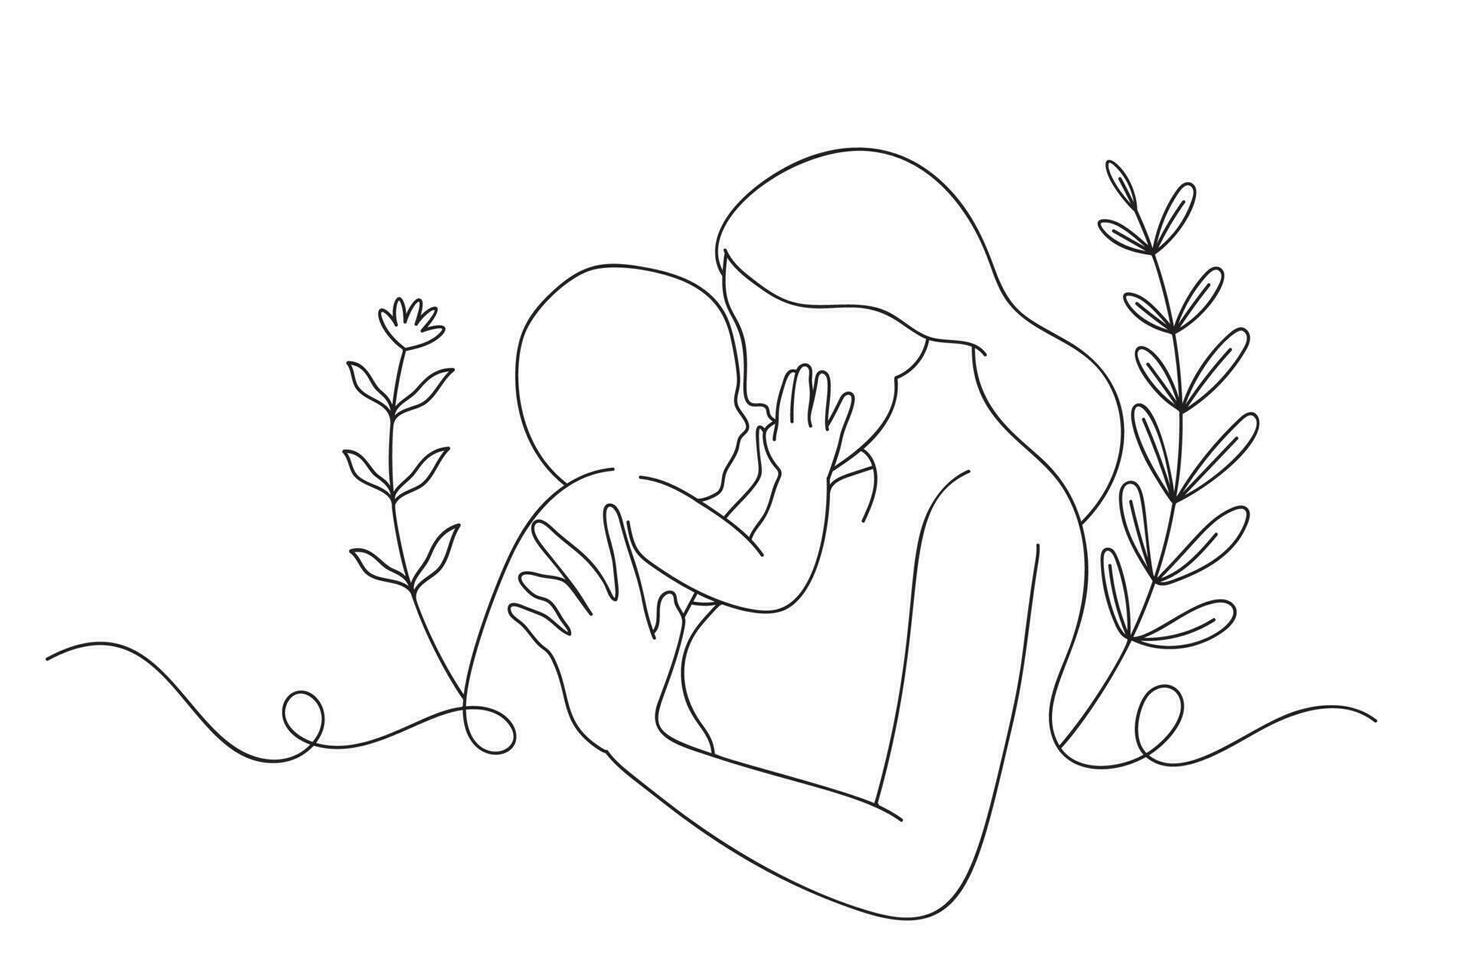 Continuous one line drawing of mother holding her baby. Mothers and baby line art style of vector illustration, Mother's Day Celebration.